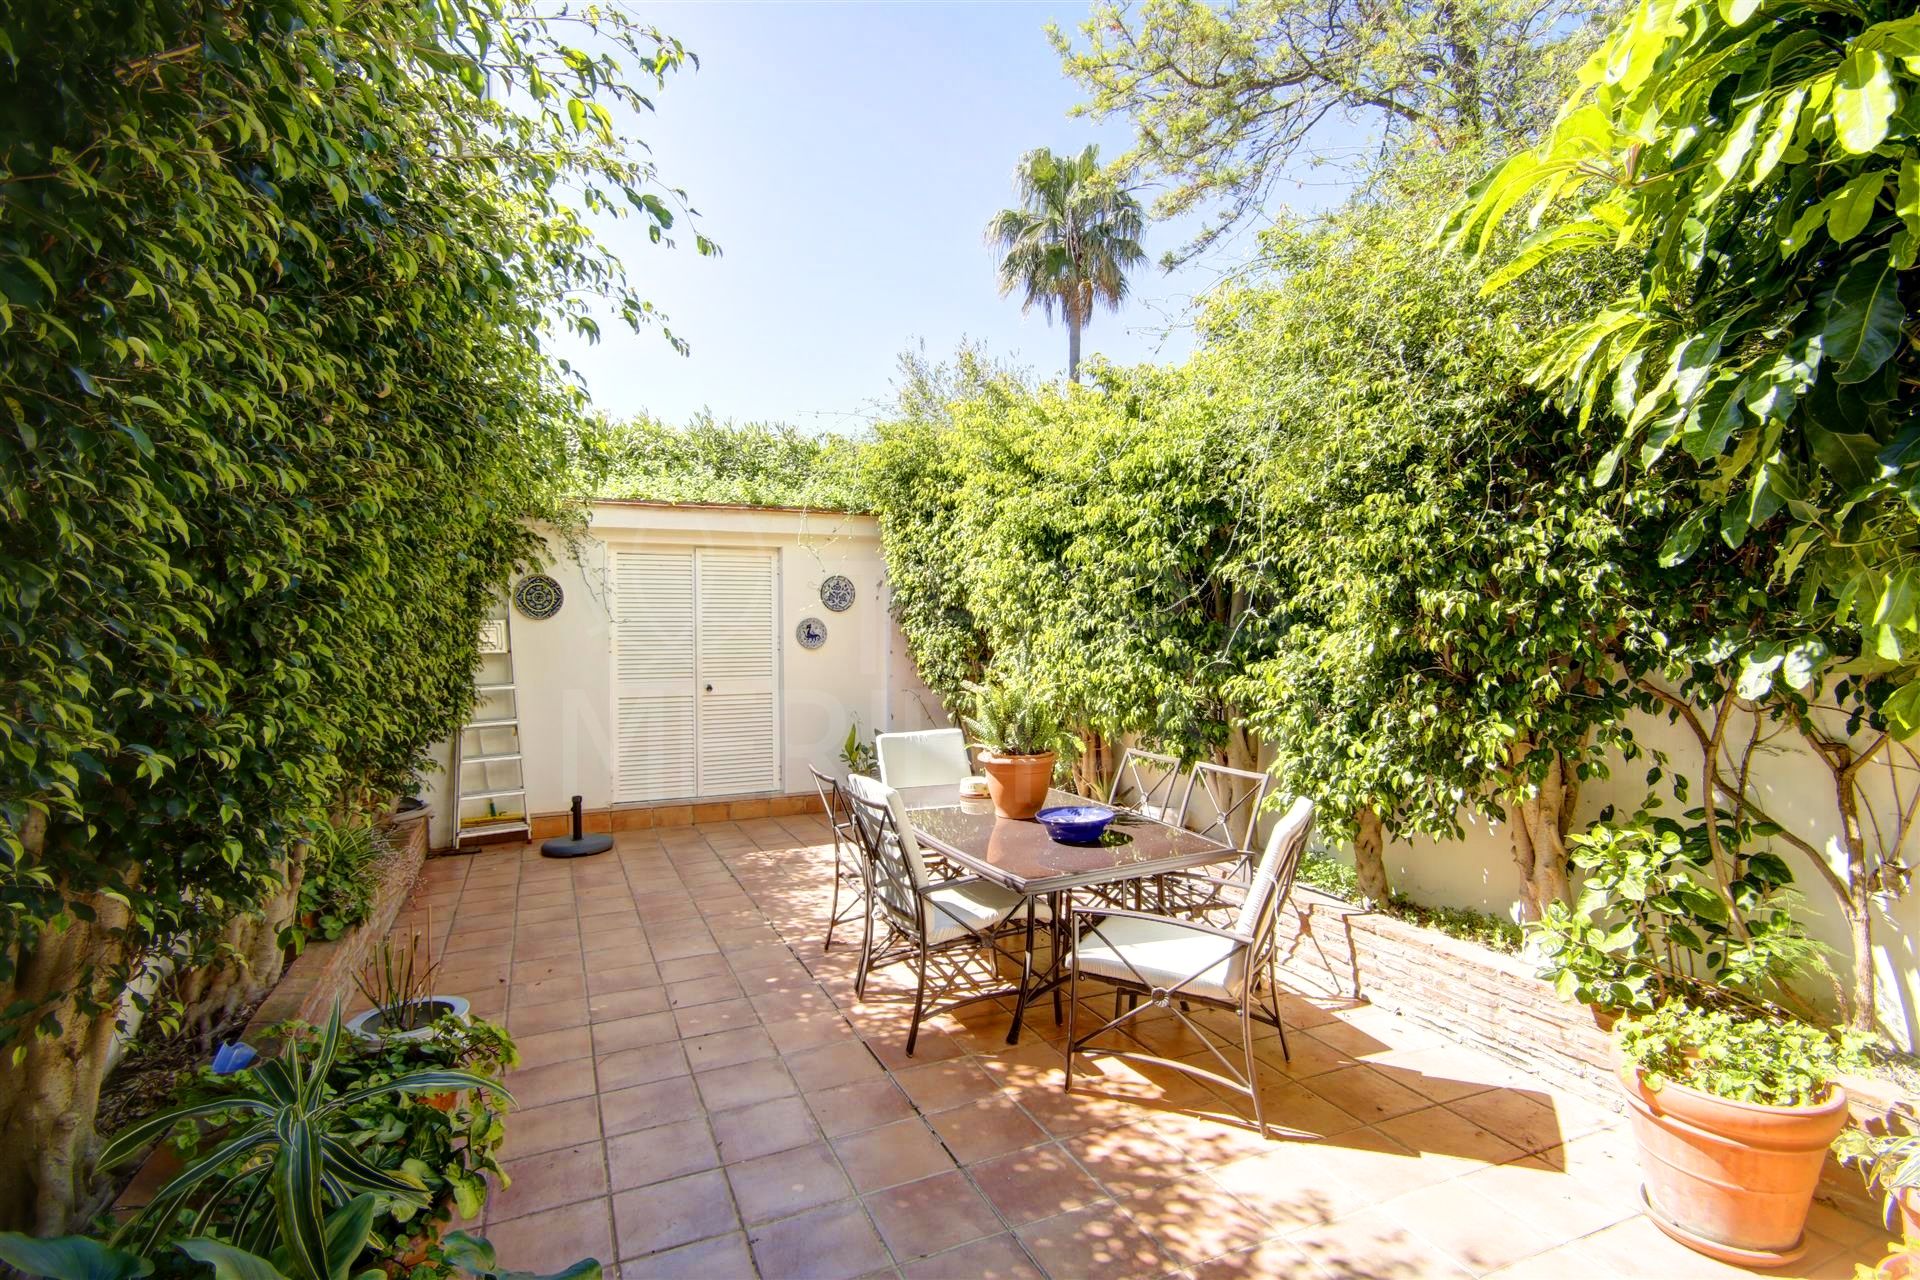 Lovely ground floor duplex apartment recently reformed, close to Estepona Marina with a large patio